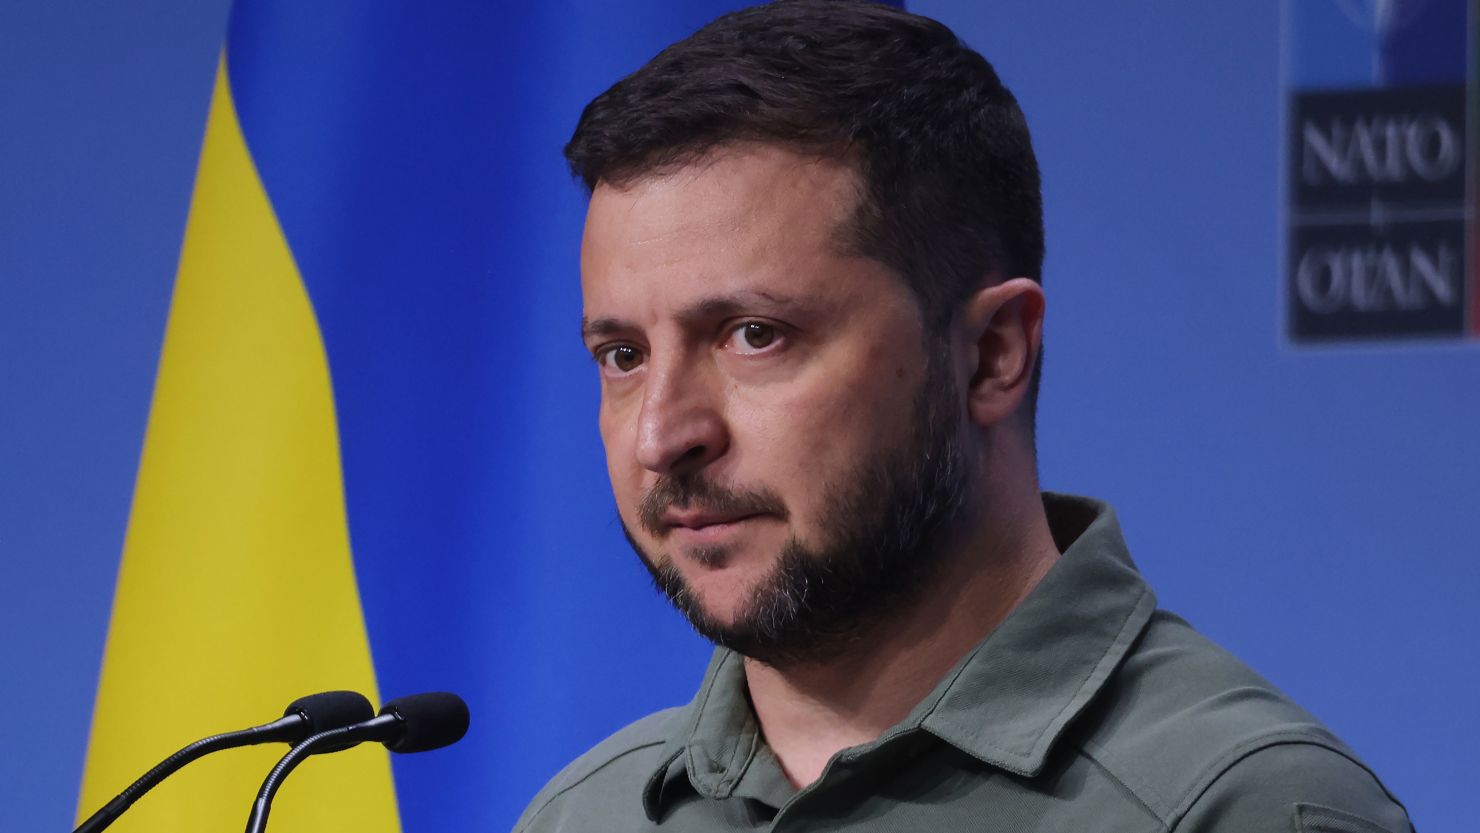 President Zelensky, pictured at the NATO summit in Vilnius in July, announced the latest dismissals in a statement on Friday.